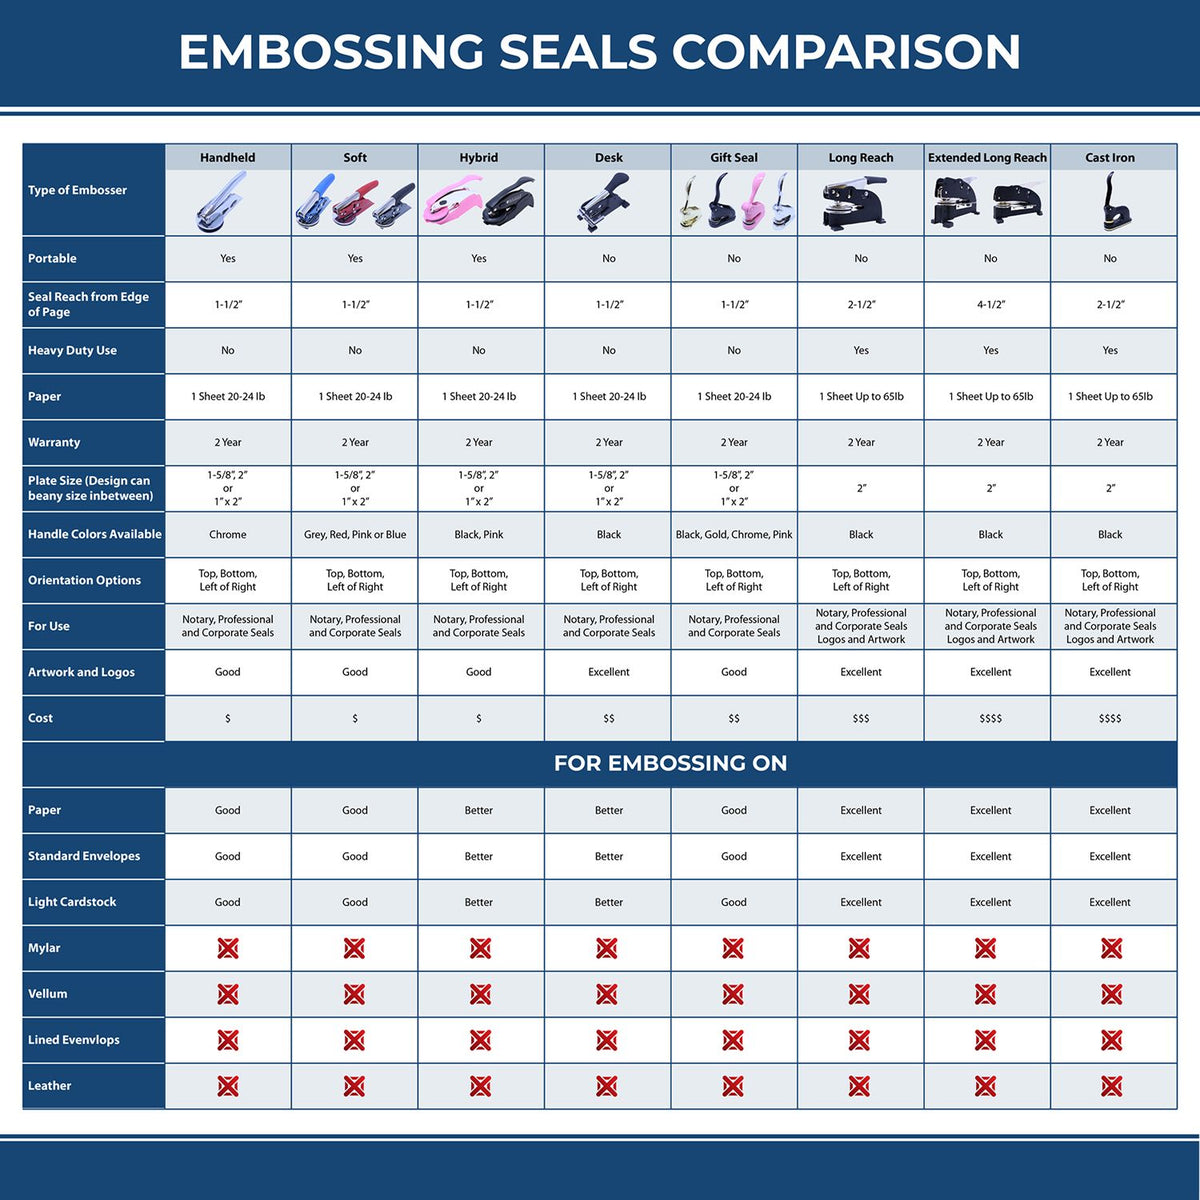 A comparison chart for the different types of mount models available for the State of Wisconsin Extended Long Reach Geologist Seal